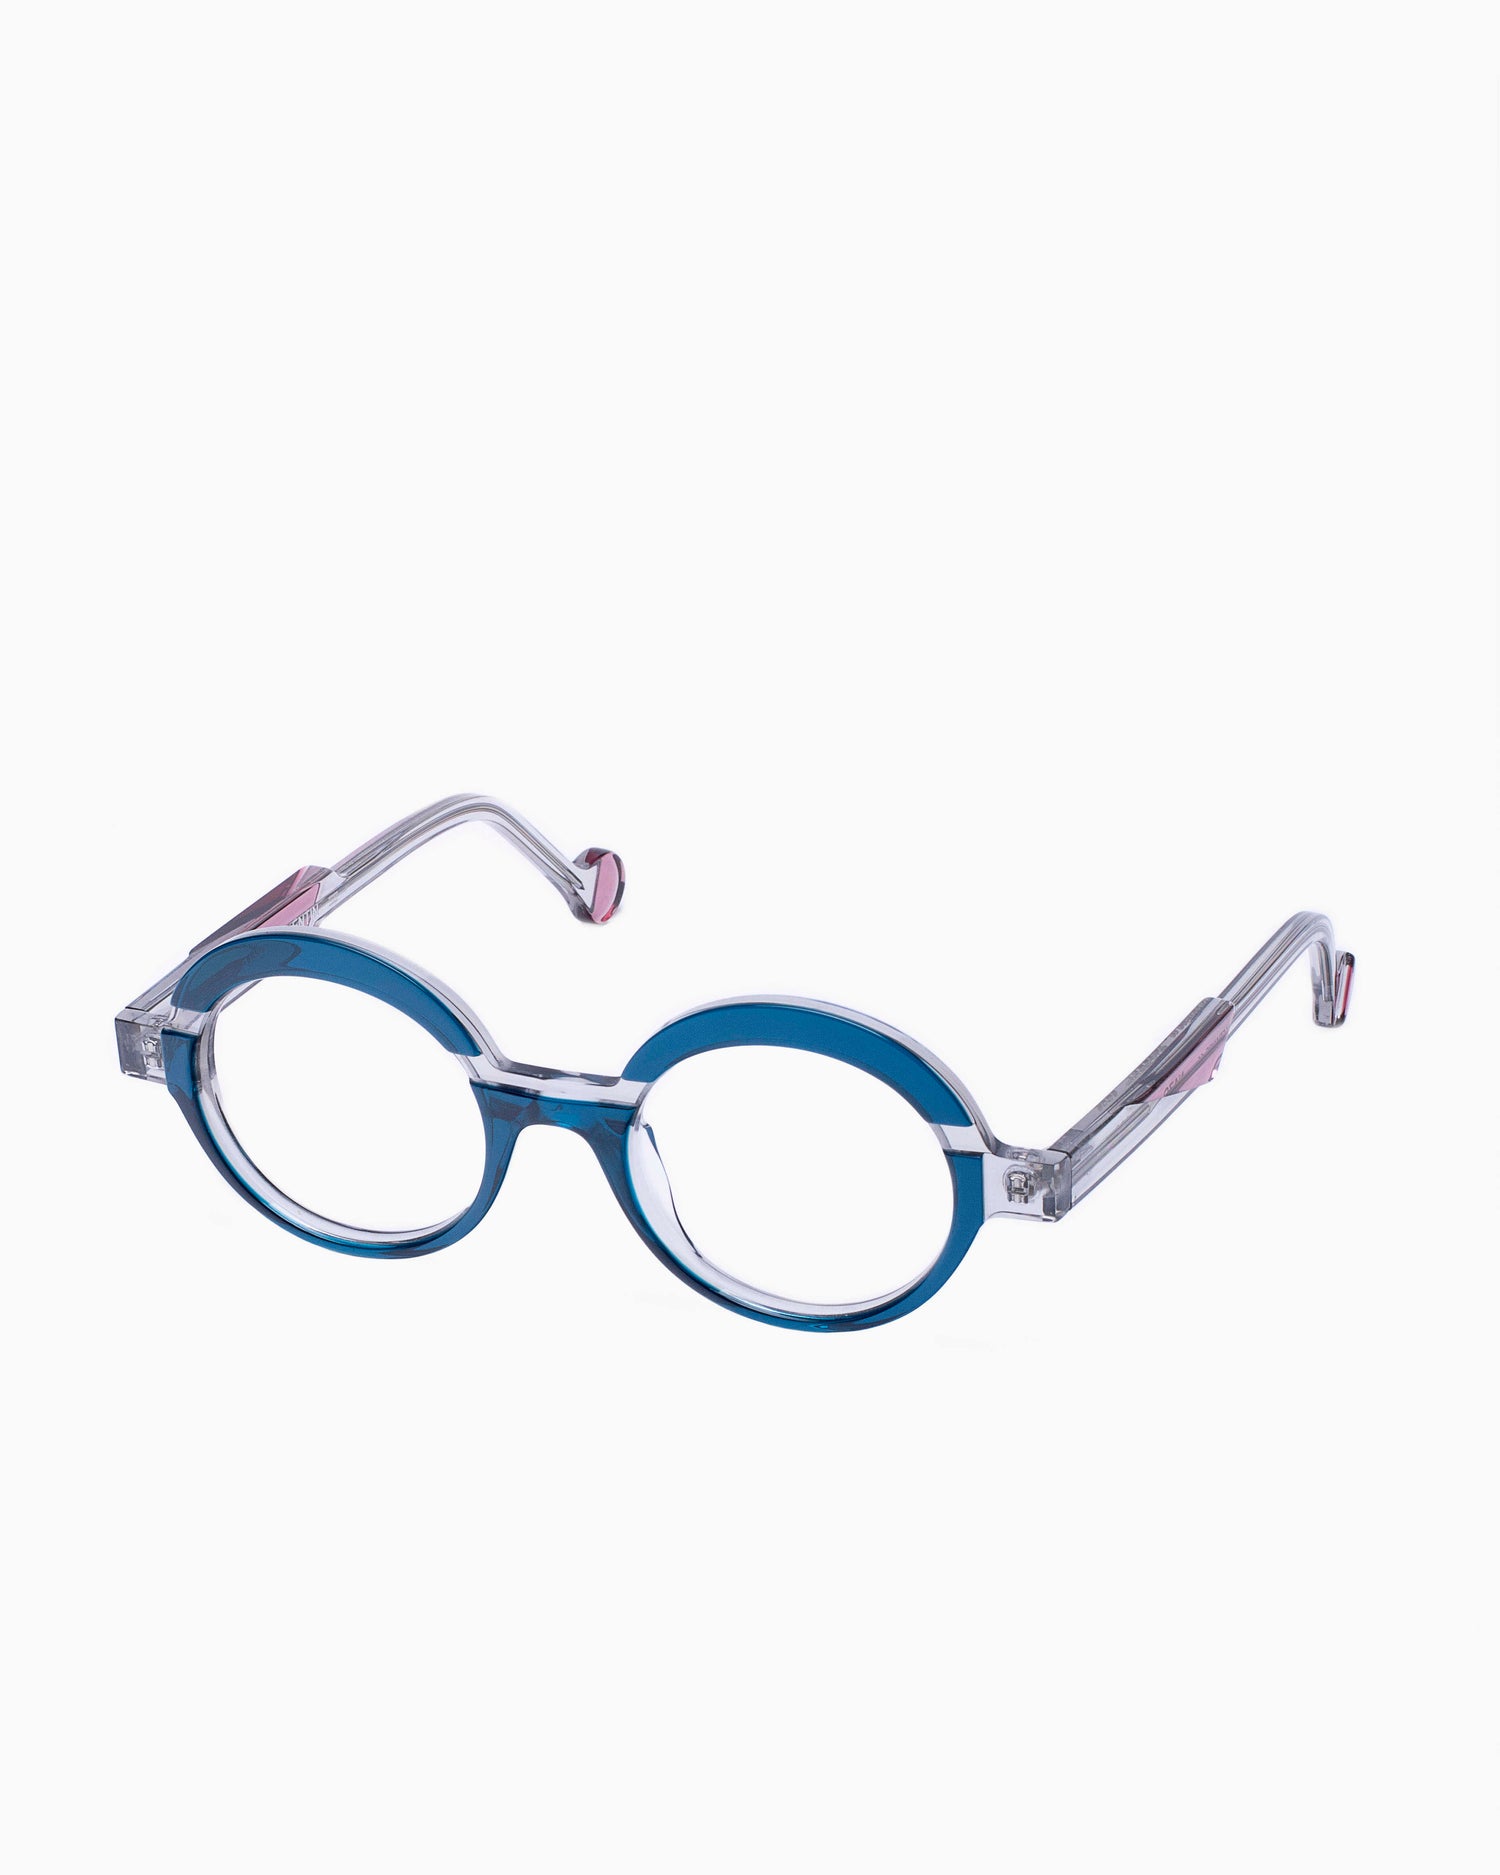 Anne and Valentin - Nazca - 9C06 | glasses bar:  Marie-Sophie Dion